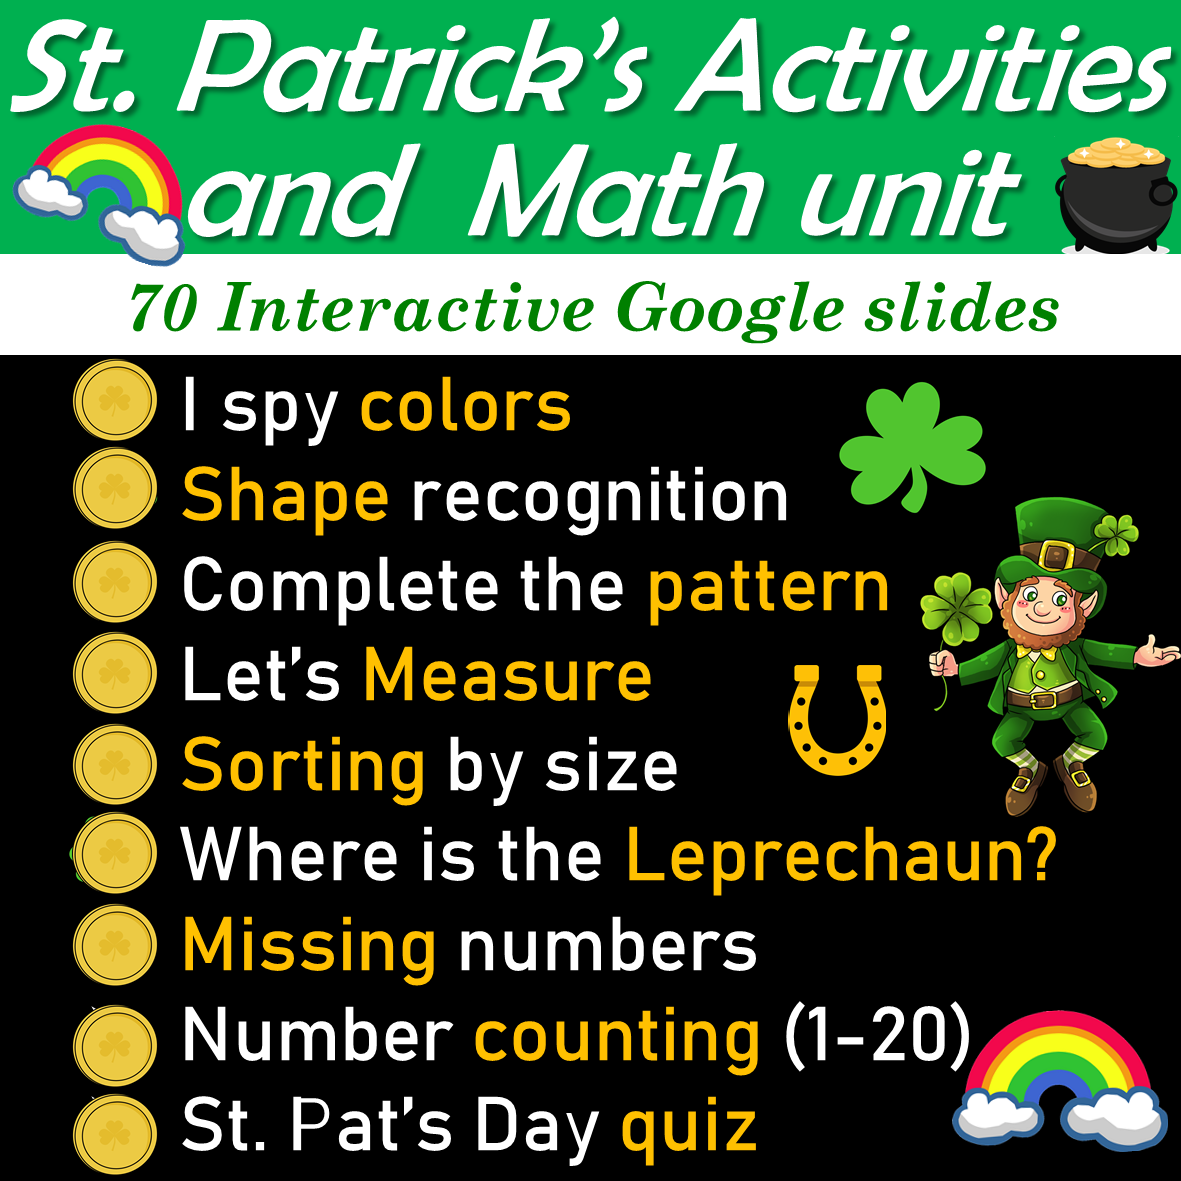 St Patrick's Day Activities and Math unit | Distance learning| Virtual - 70 Google Slides